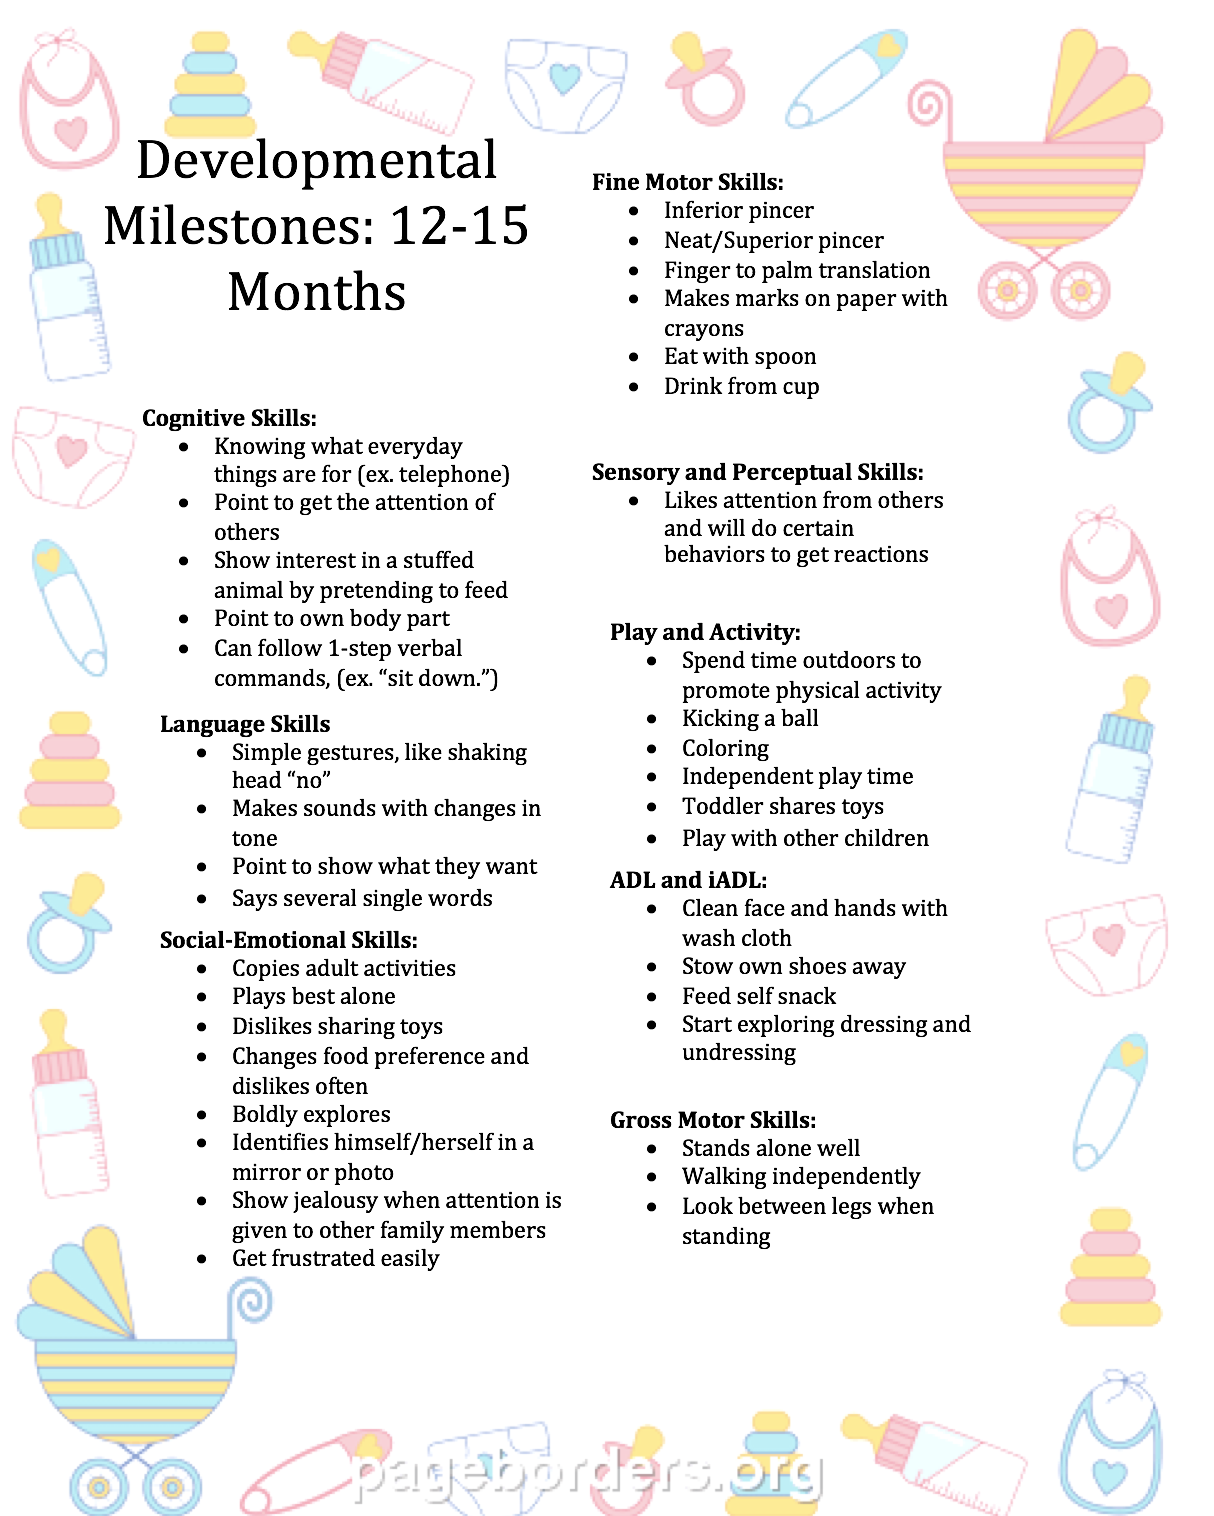 Language Milestones For Toddlers Chart